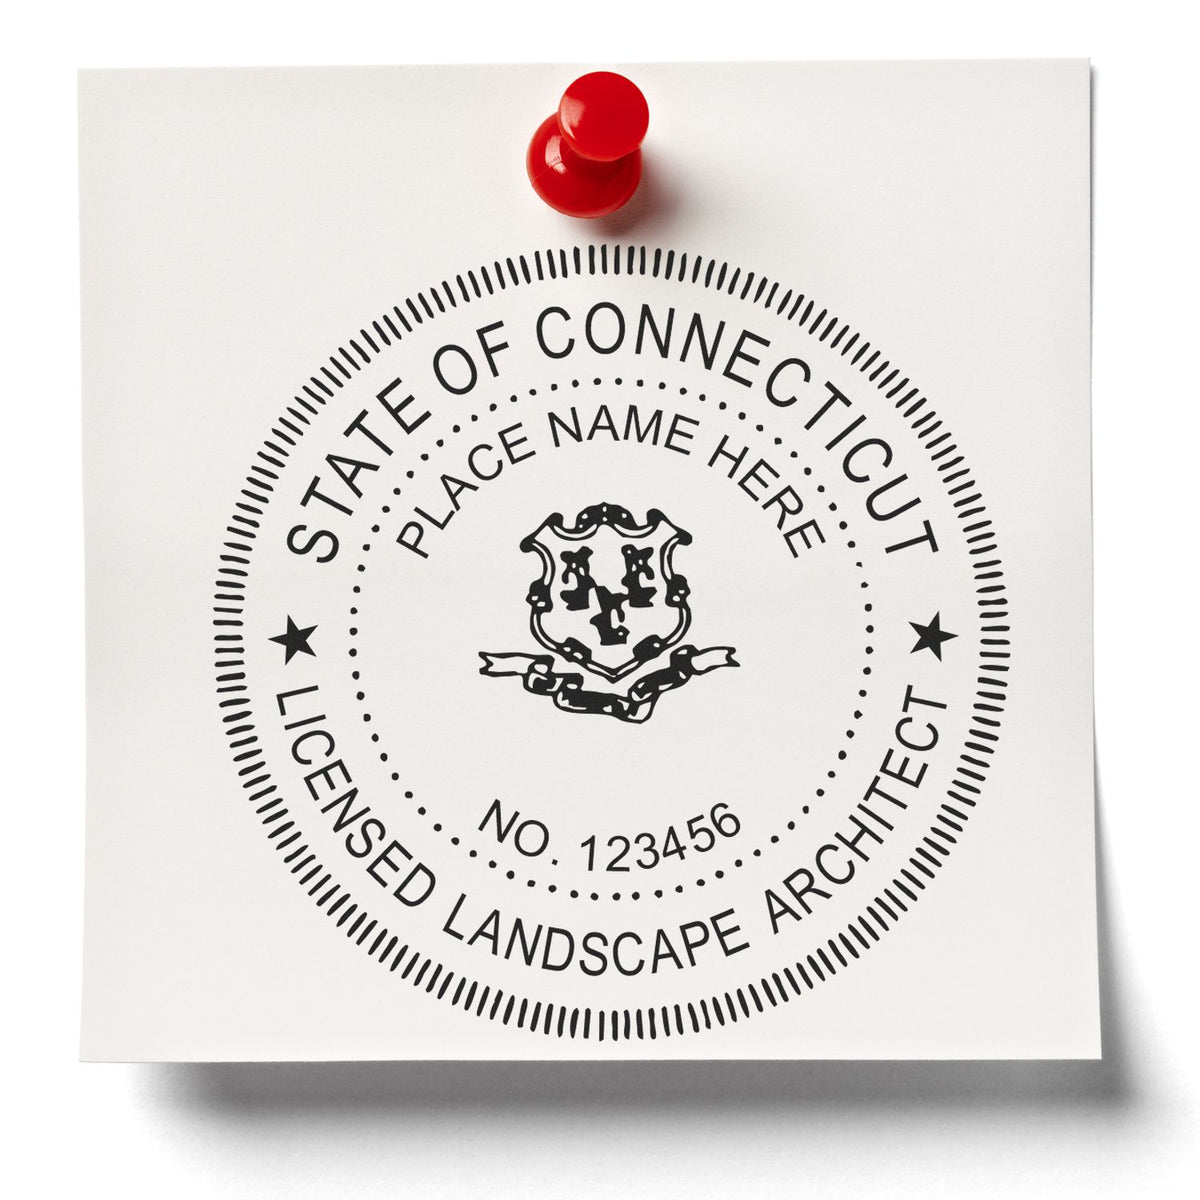 A stamped impression of the Digital Connecticut Landscape Architect Stamp in this stylish lifestyle photo, setting the tone for a unique and personalized product.